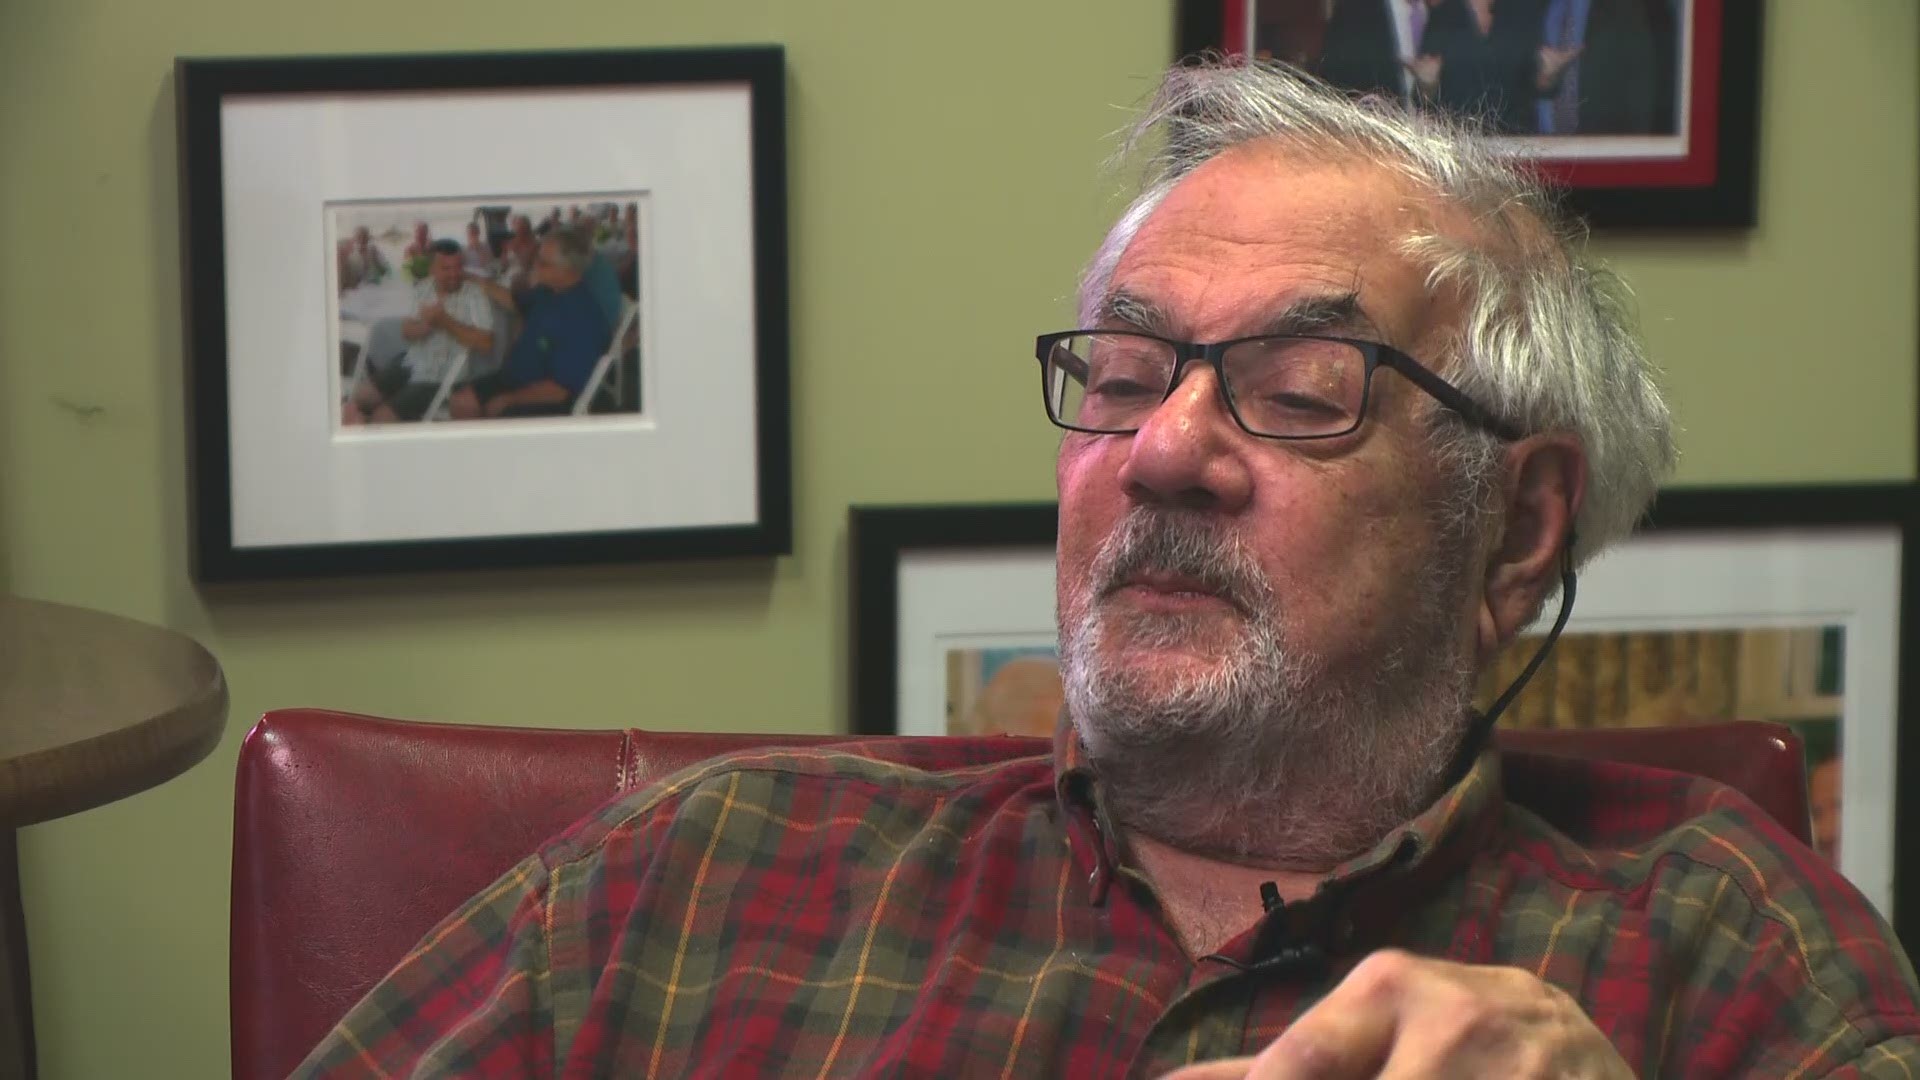 Barney Frank sat down with 207's Beth McEvoy in November 2020, looking back at a trailblazing career that spanned more than three decades in politics.